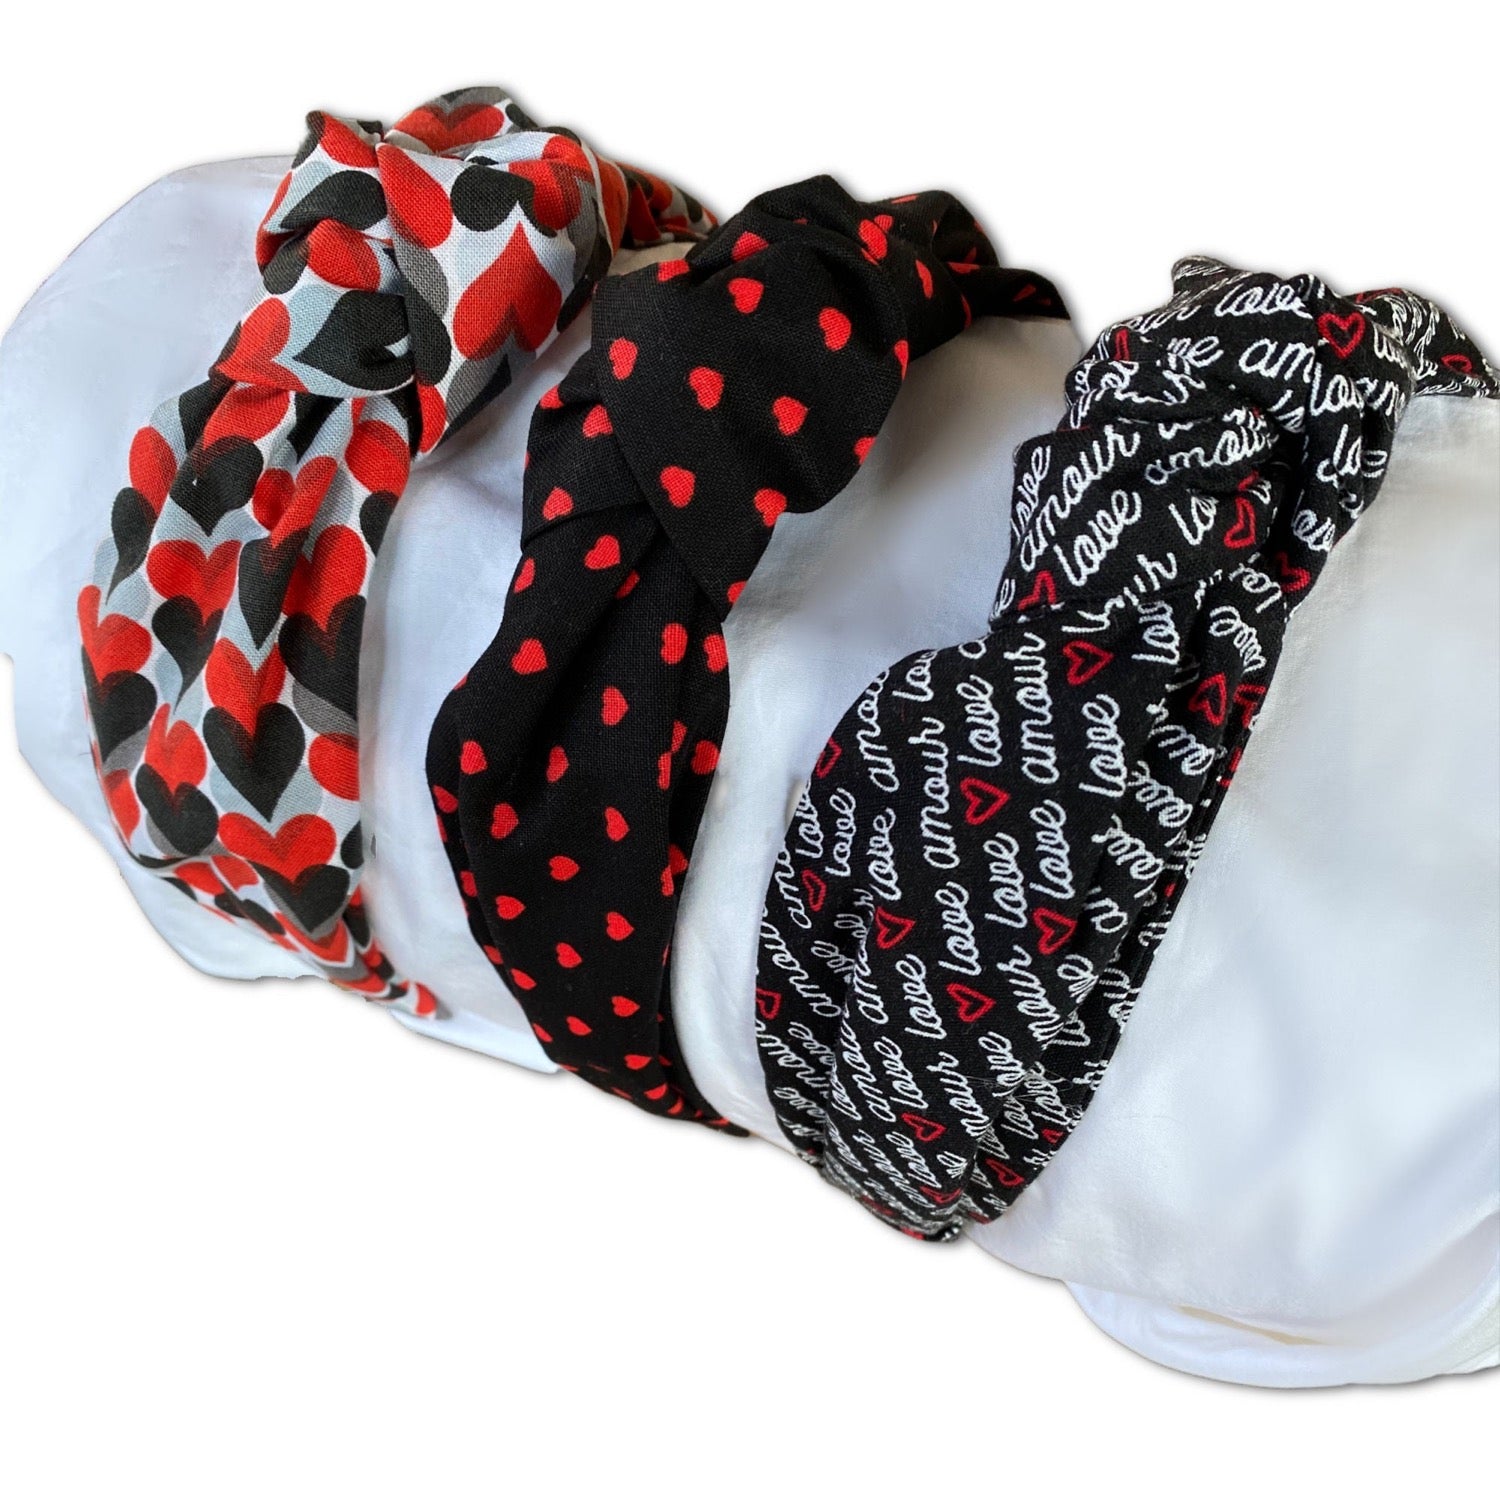 Various printed Valentine's Day themed top knot styled headbands with hearts and the words love featured on one. Black, red, grey and white themed